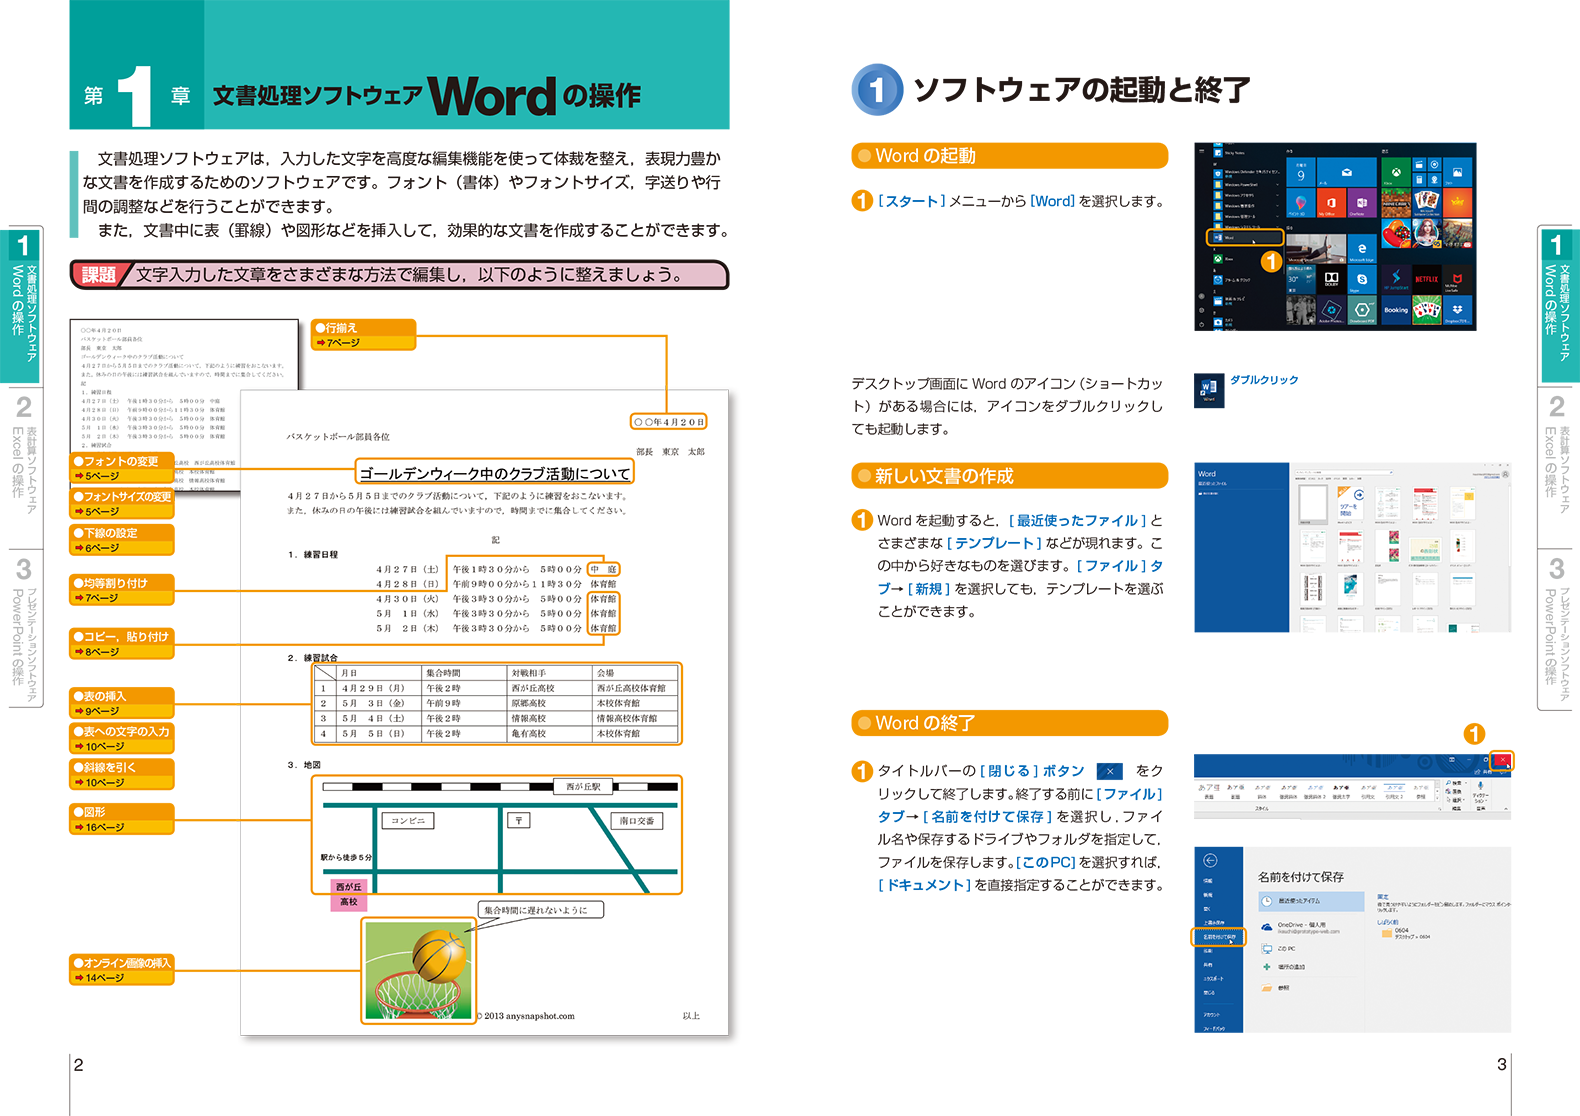 Word Excel PowerPoint の基本操作　Office 2013 Word Excel PowerPoint の基本操作　Office 2016 紙面サンプル